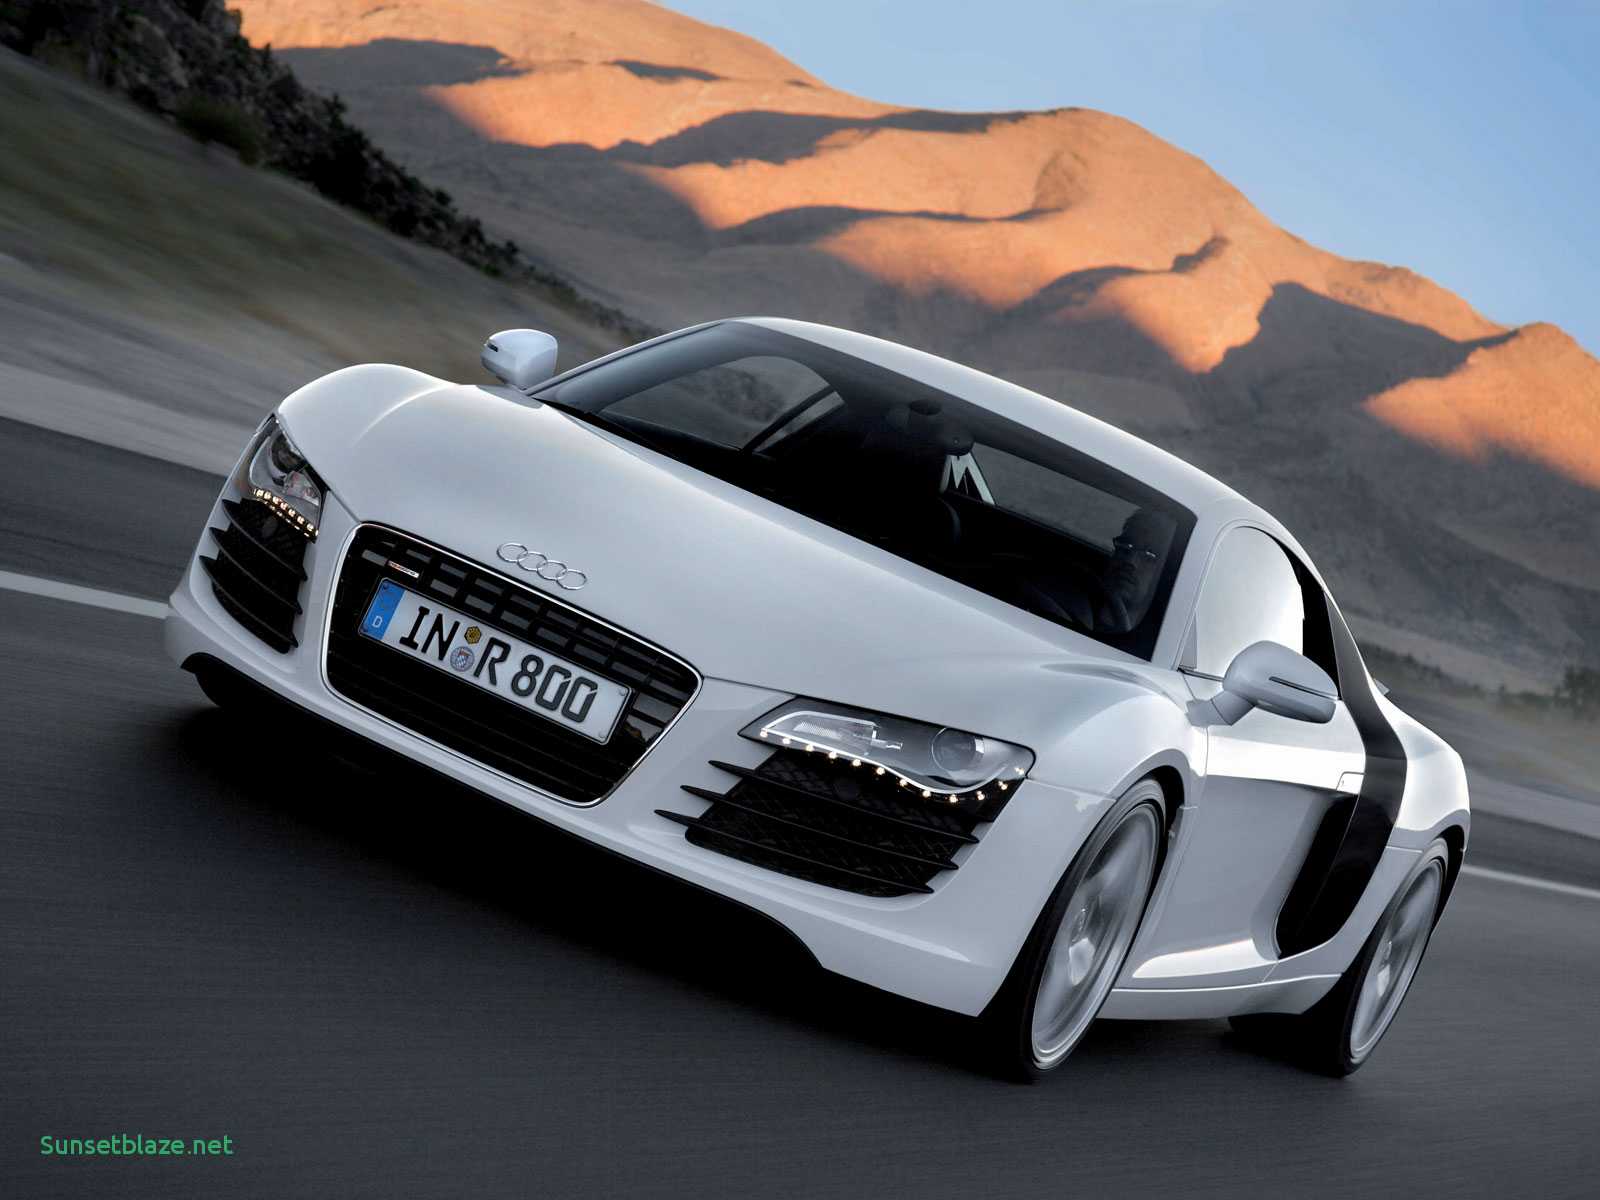 Audi Rs7 Background Best Of Of Audi Car Wallpaper HD for Windows 7